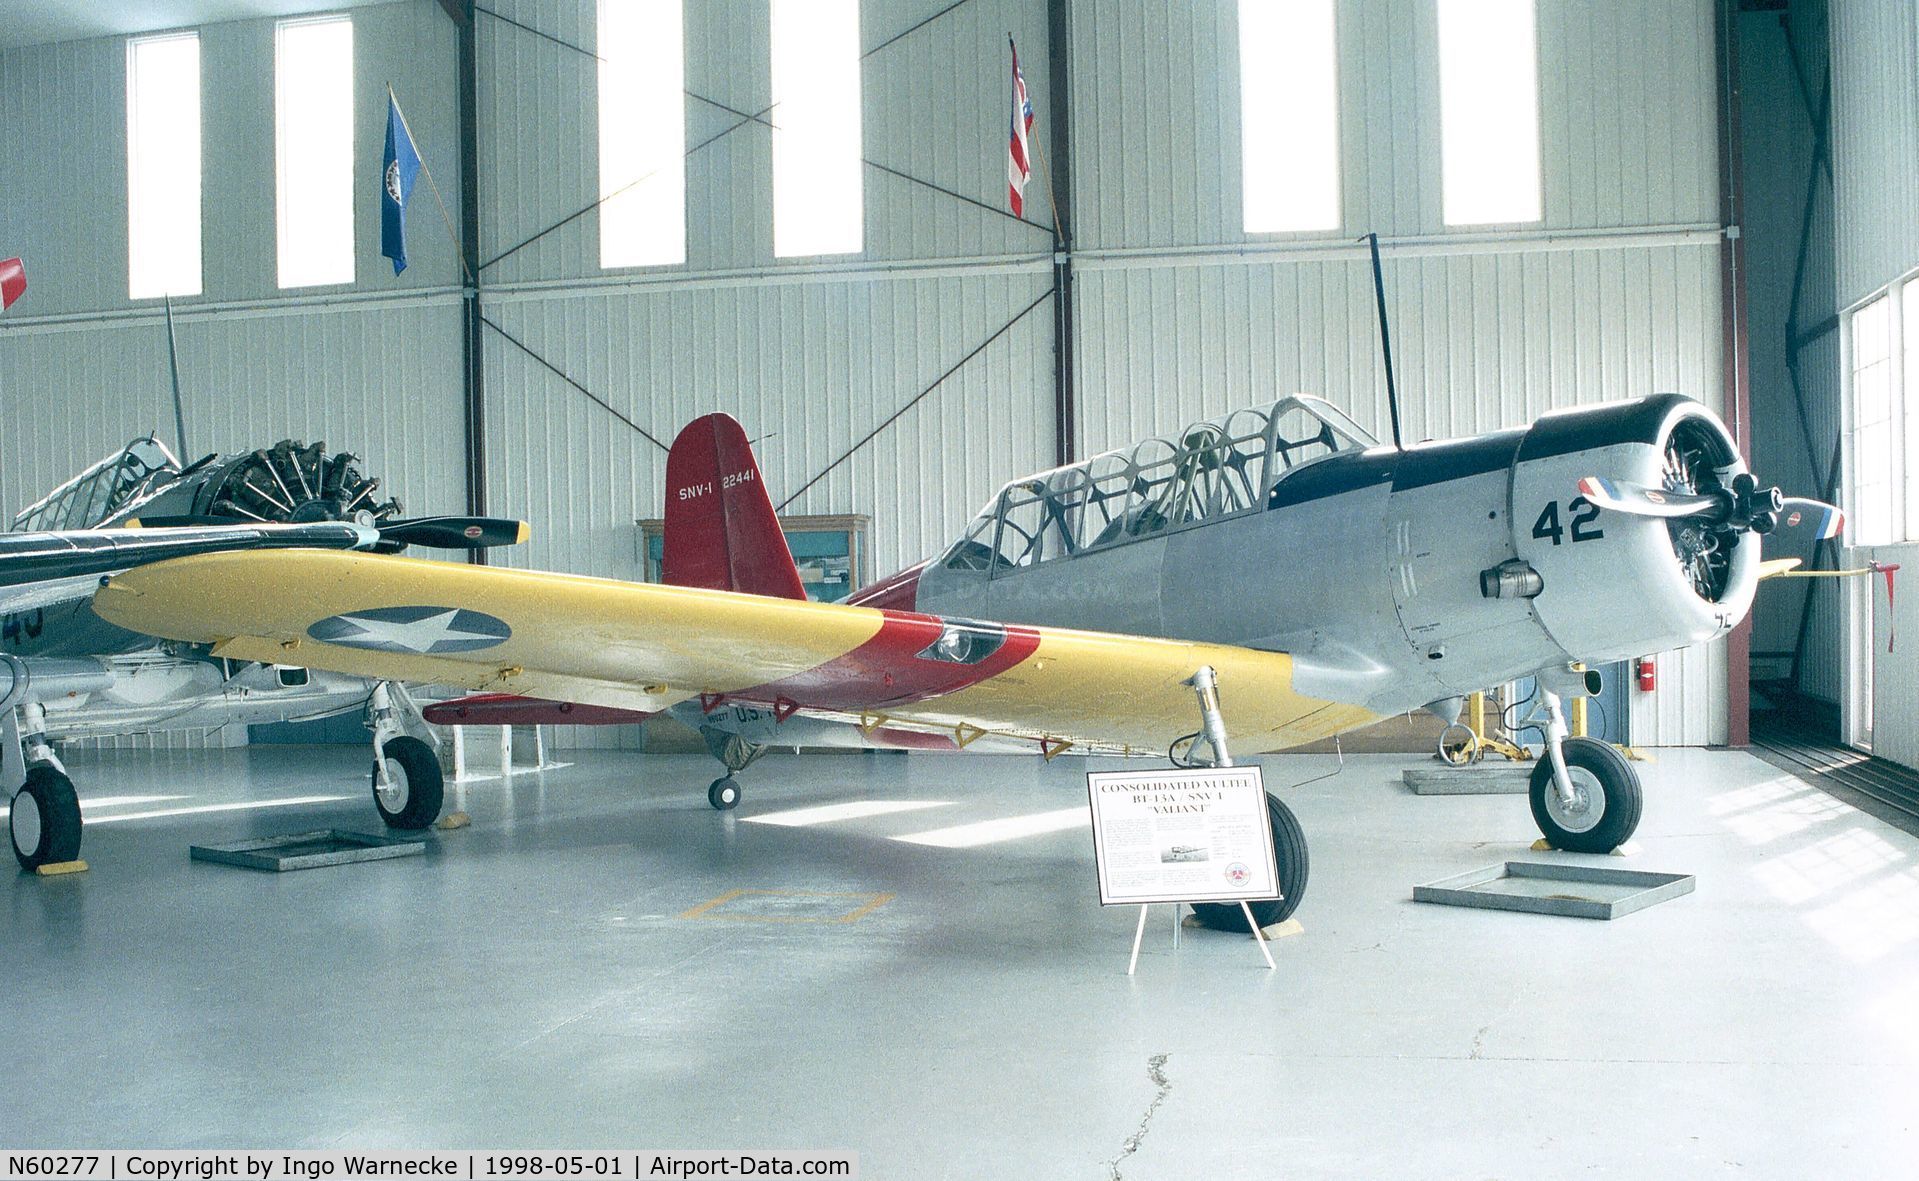 N60277, 1942 Consolidated Vultee BT-13A C/N 6519, Vultee BT-13A (USN SNV-1) Valiant at the Mid Atlantic Air Museum, Reading PA